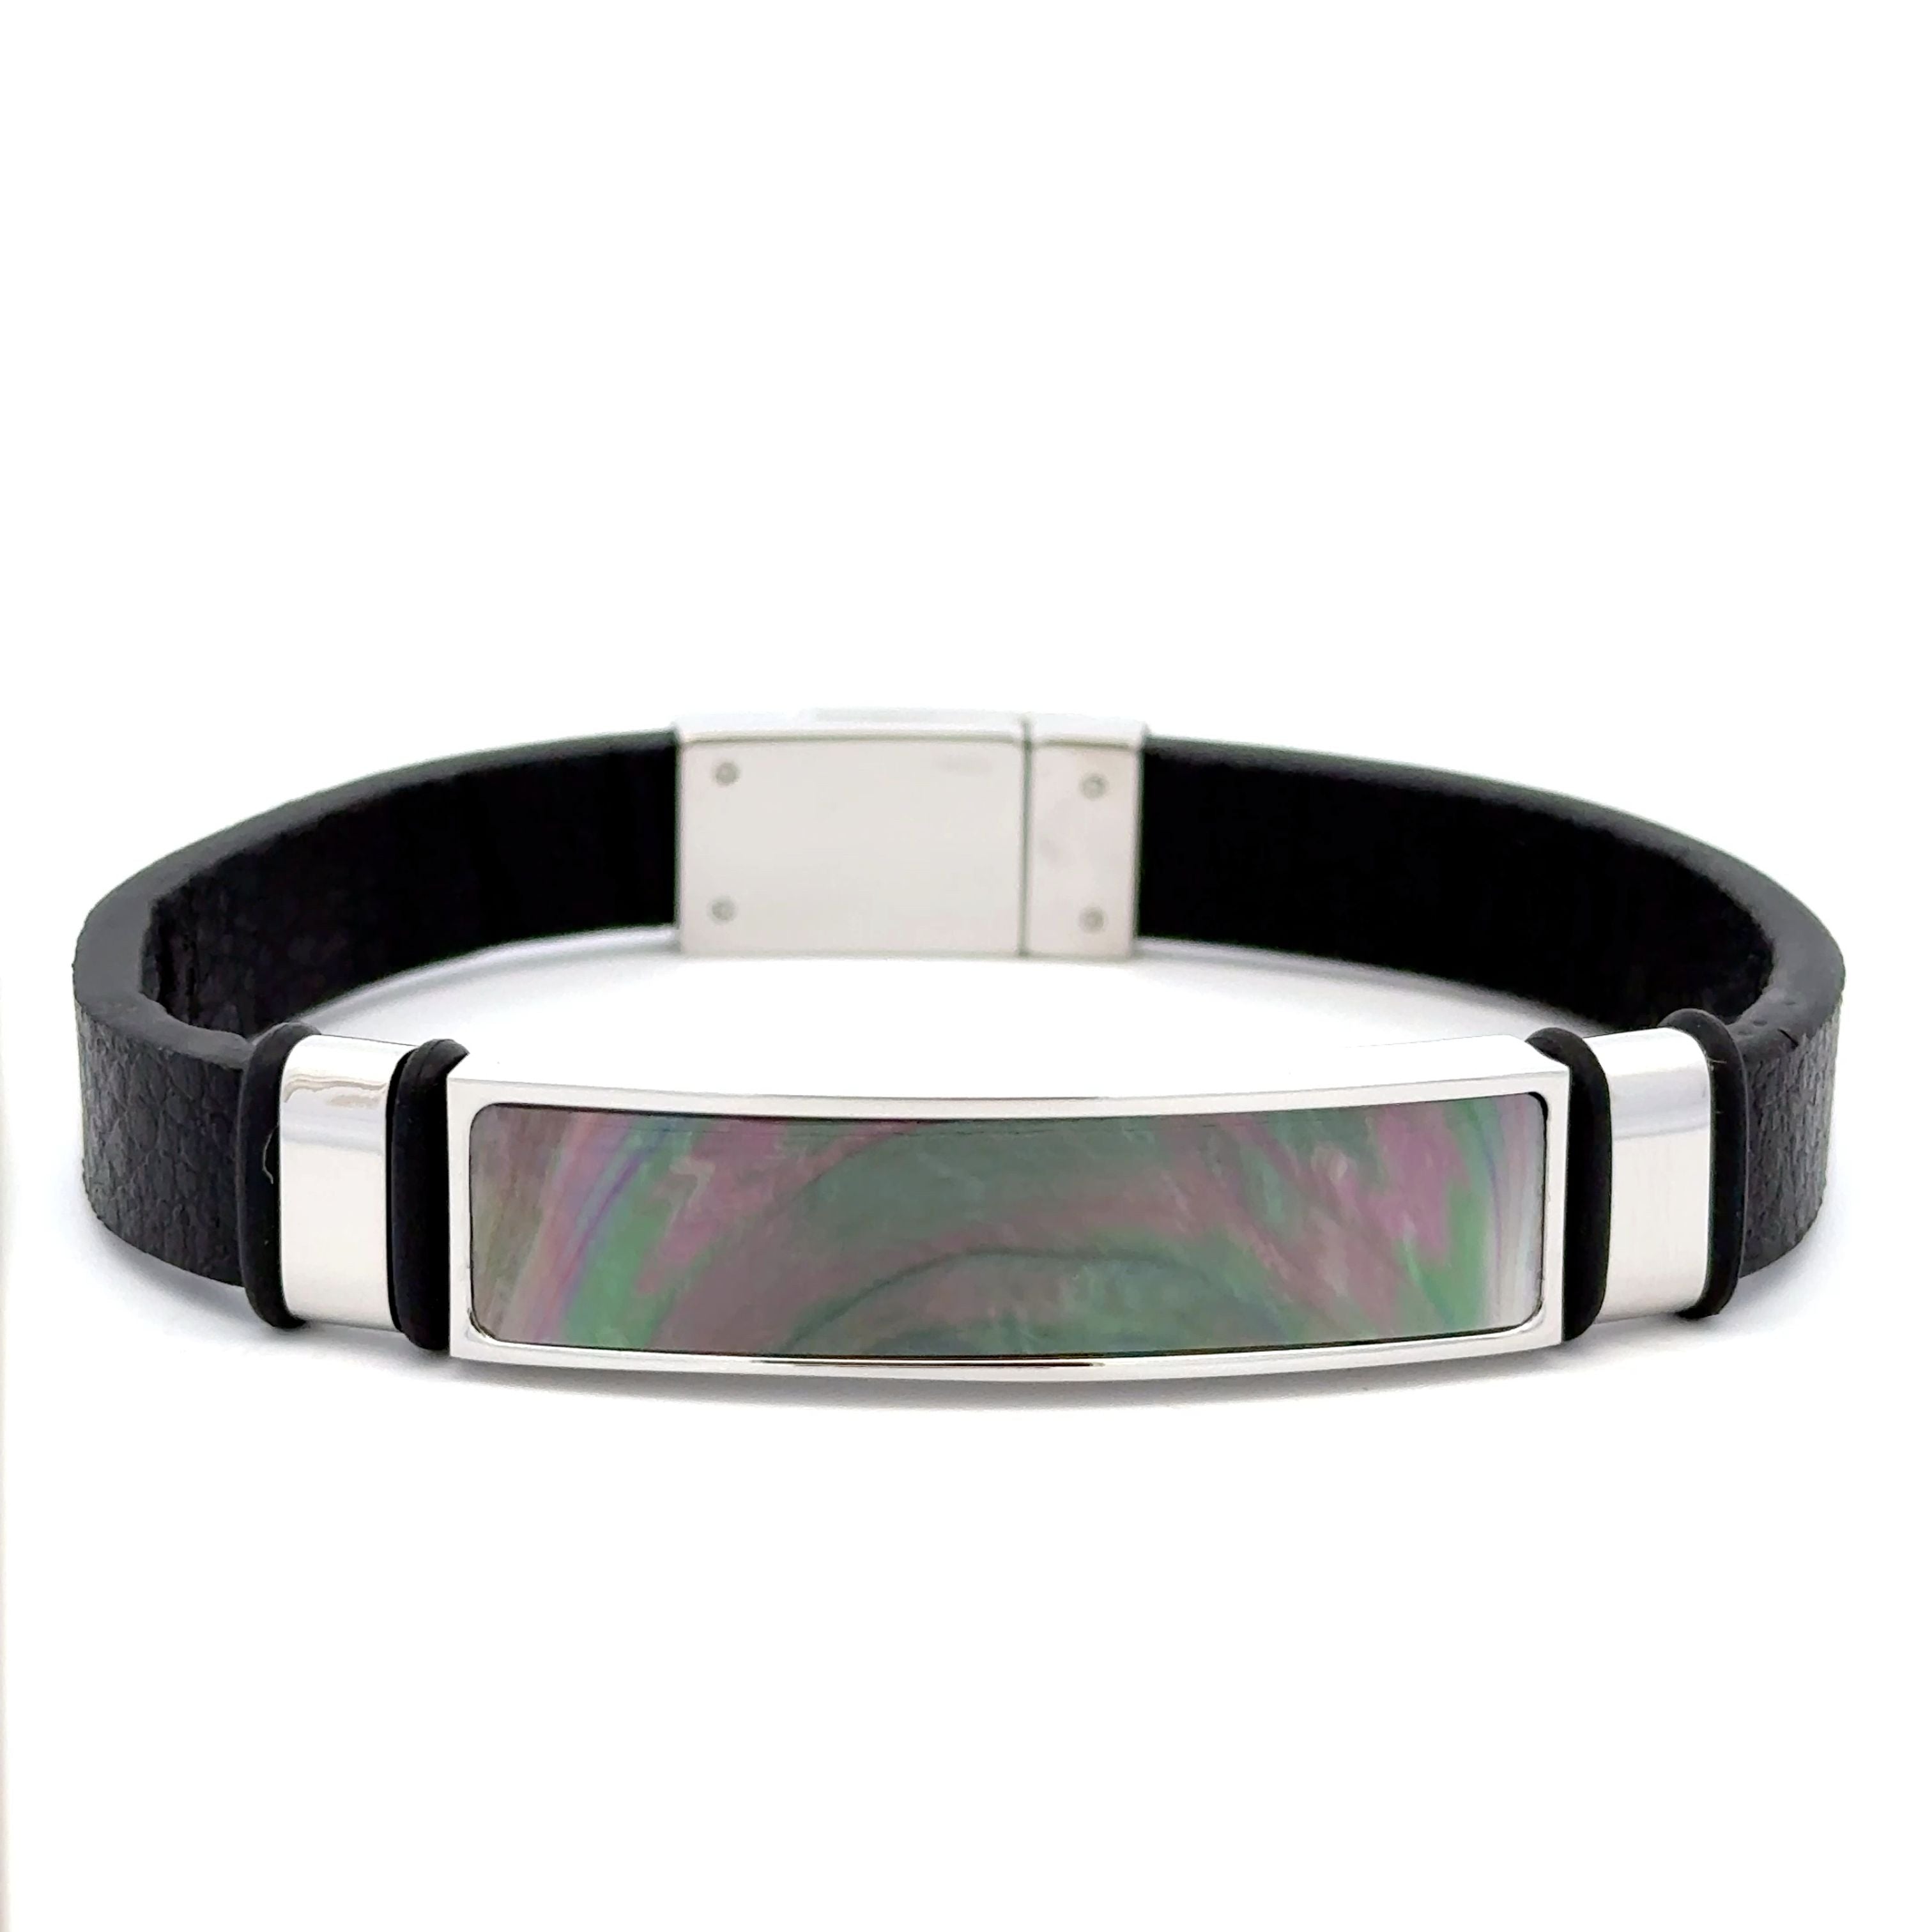 Stainless Steel Textured Leather Bracelet With Black Mother Of Pearl